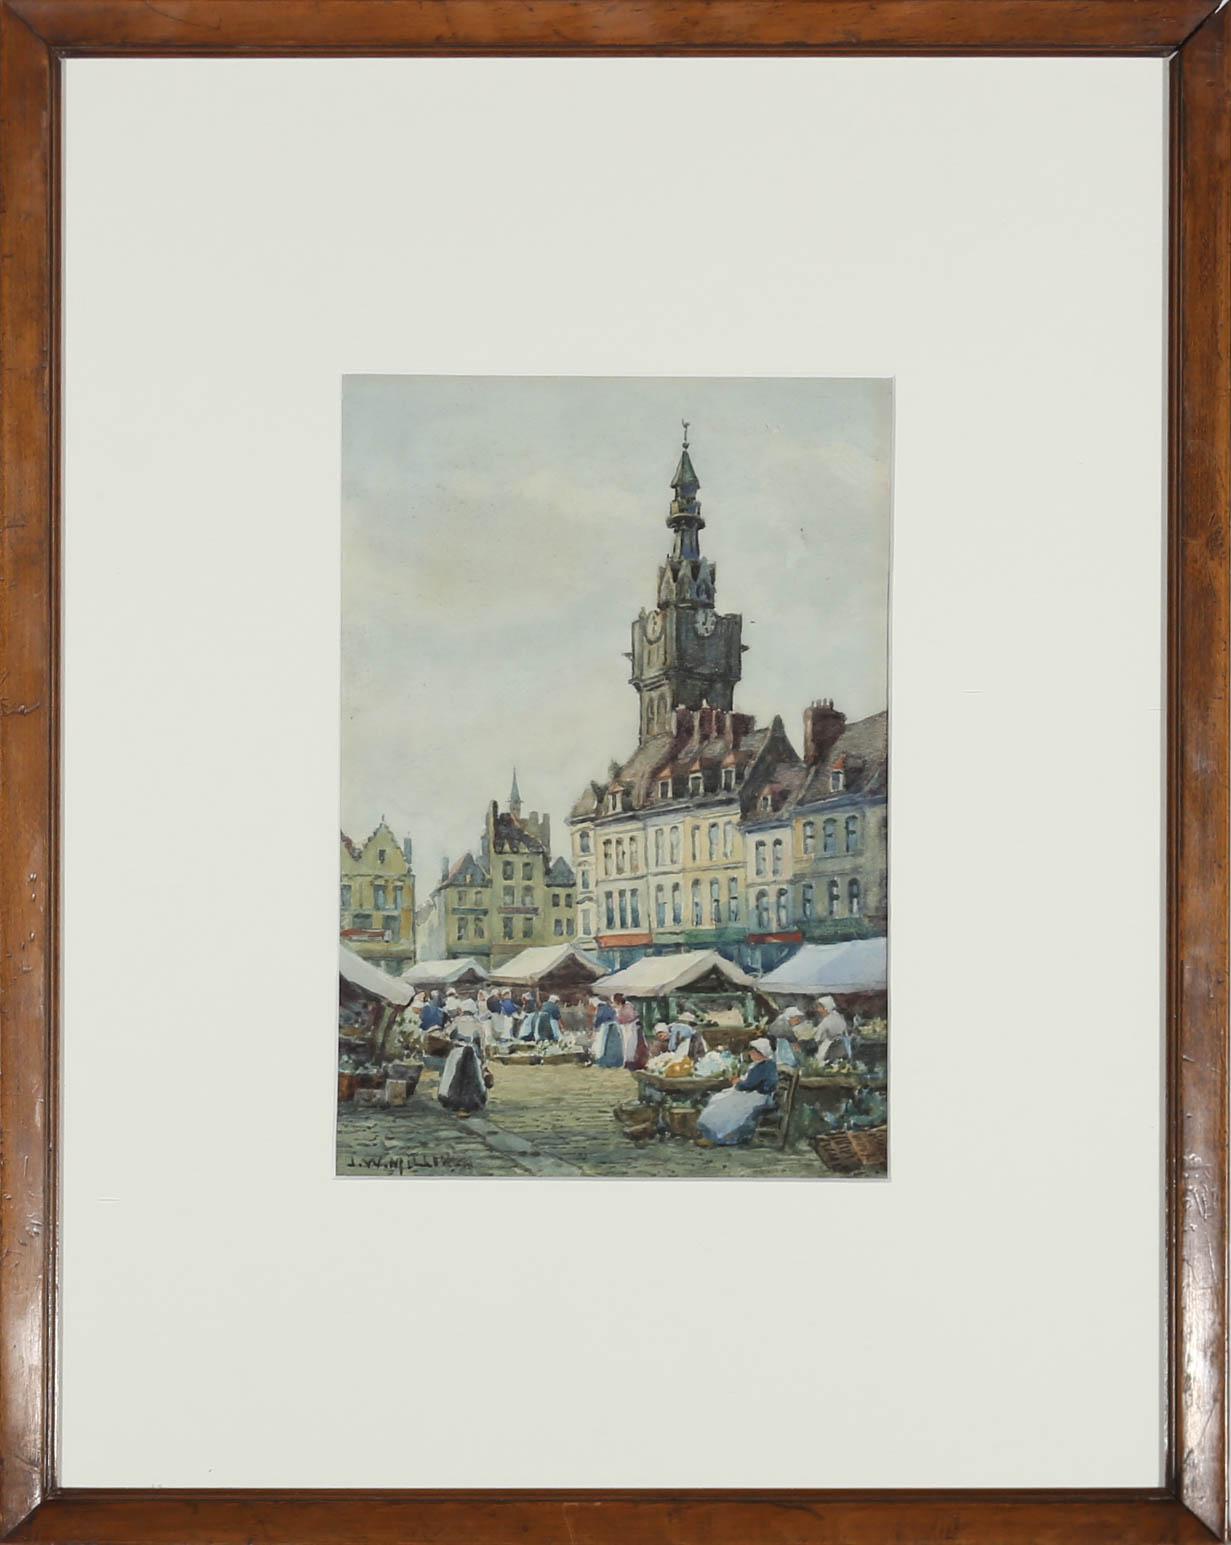 A delightful depiction a a busting market place in the town square of Bethune, France. Crowds of women buy and sell produce from market stalls in their aprons and bonnets. Signed and illegibly dated to the lower left. Presented in a simple oak